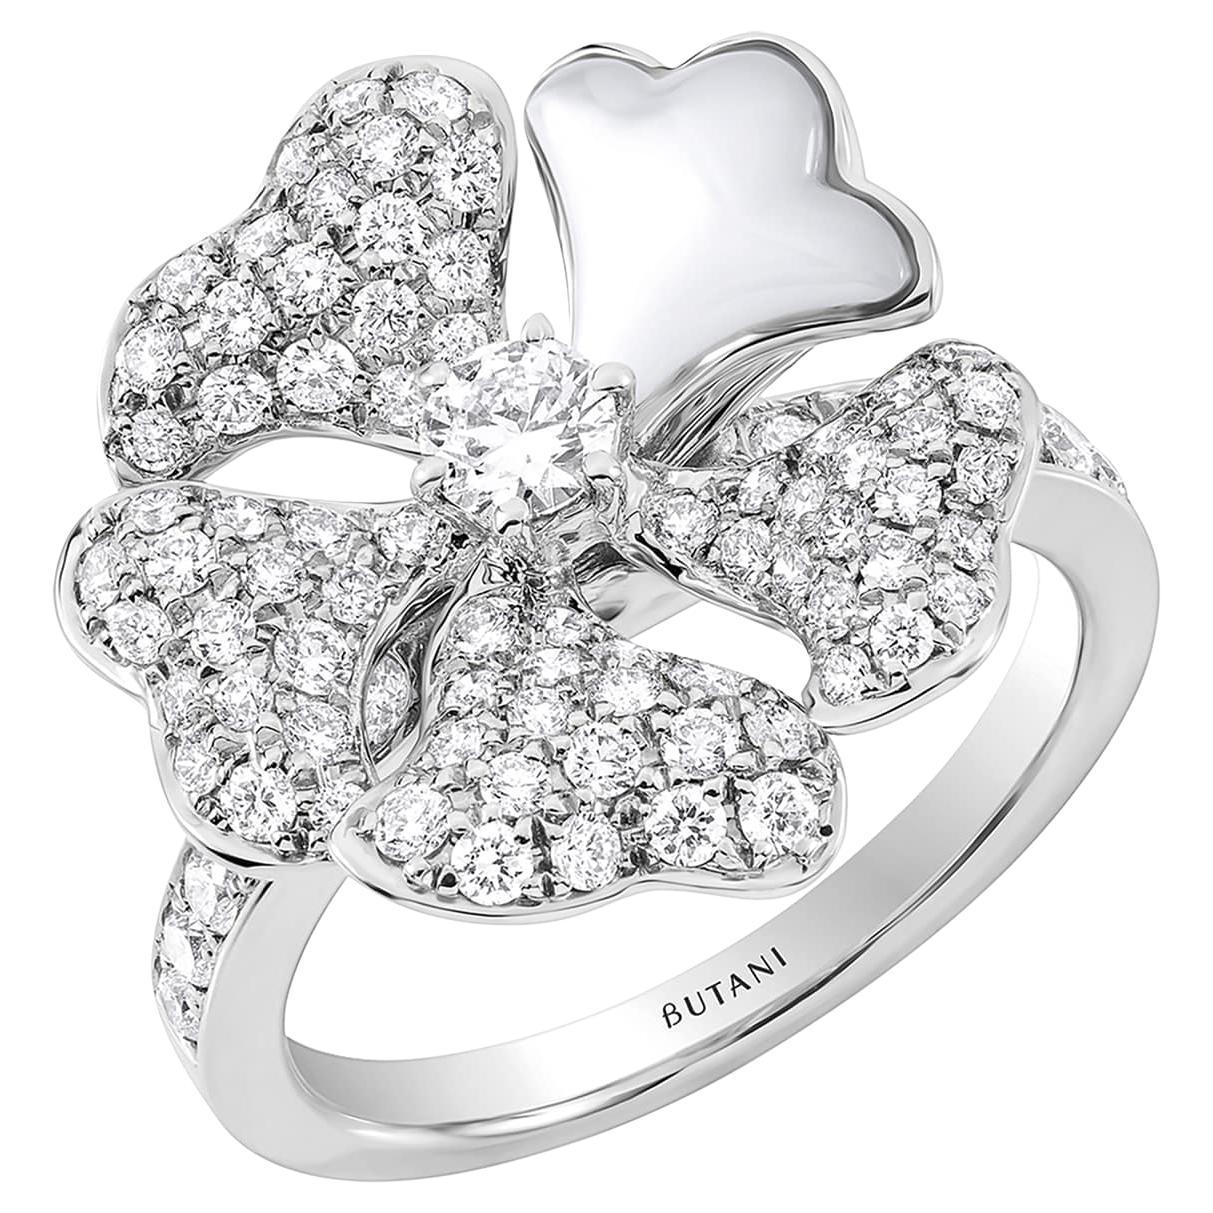 Bloom Mother of Pearl and Pave Diamond Ring in 18k White Gold